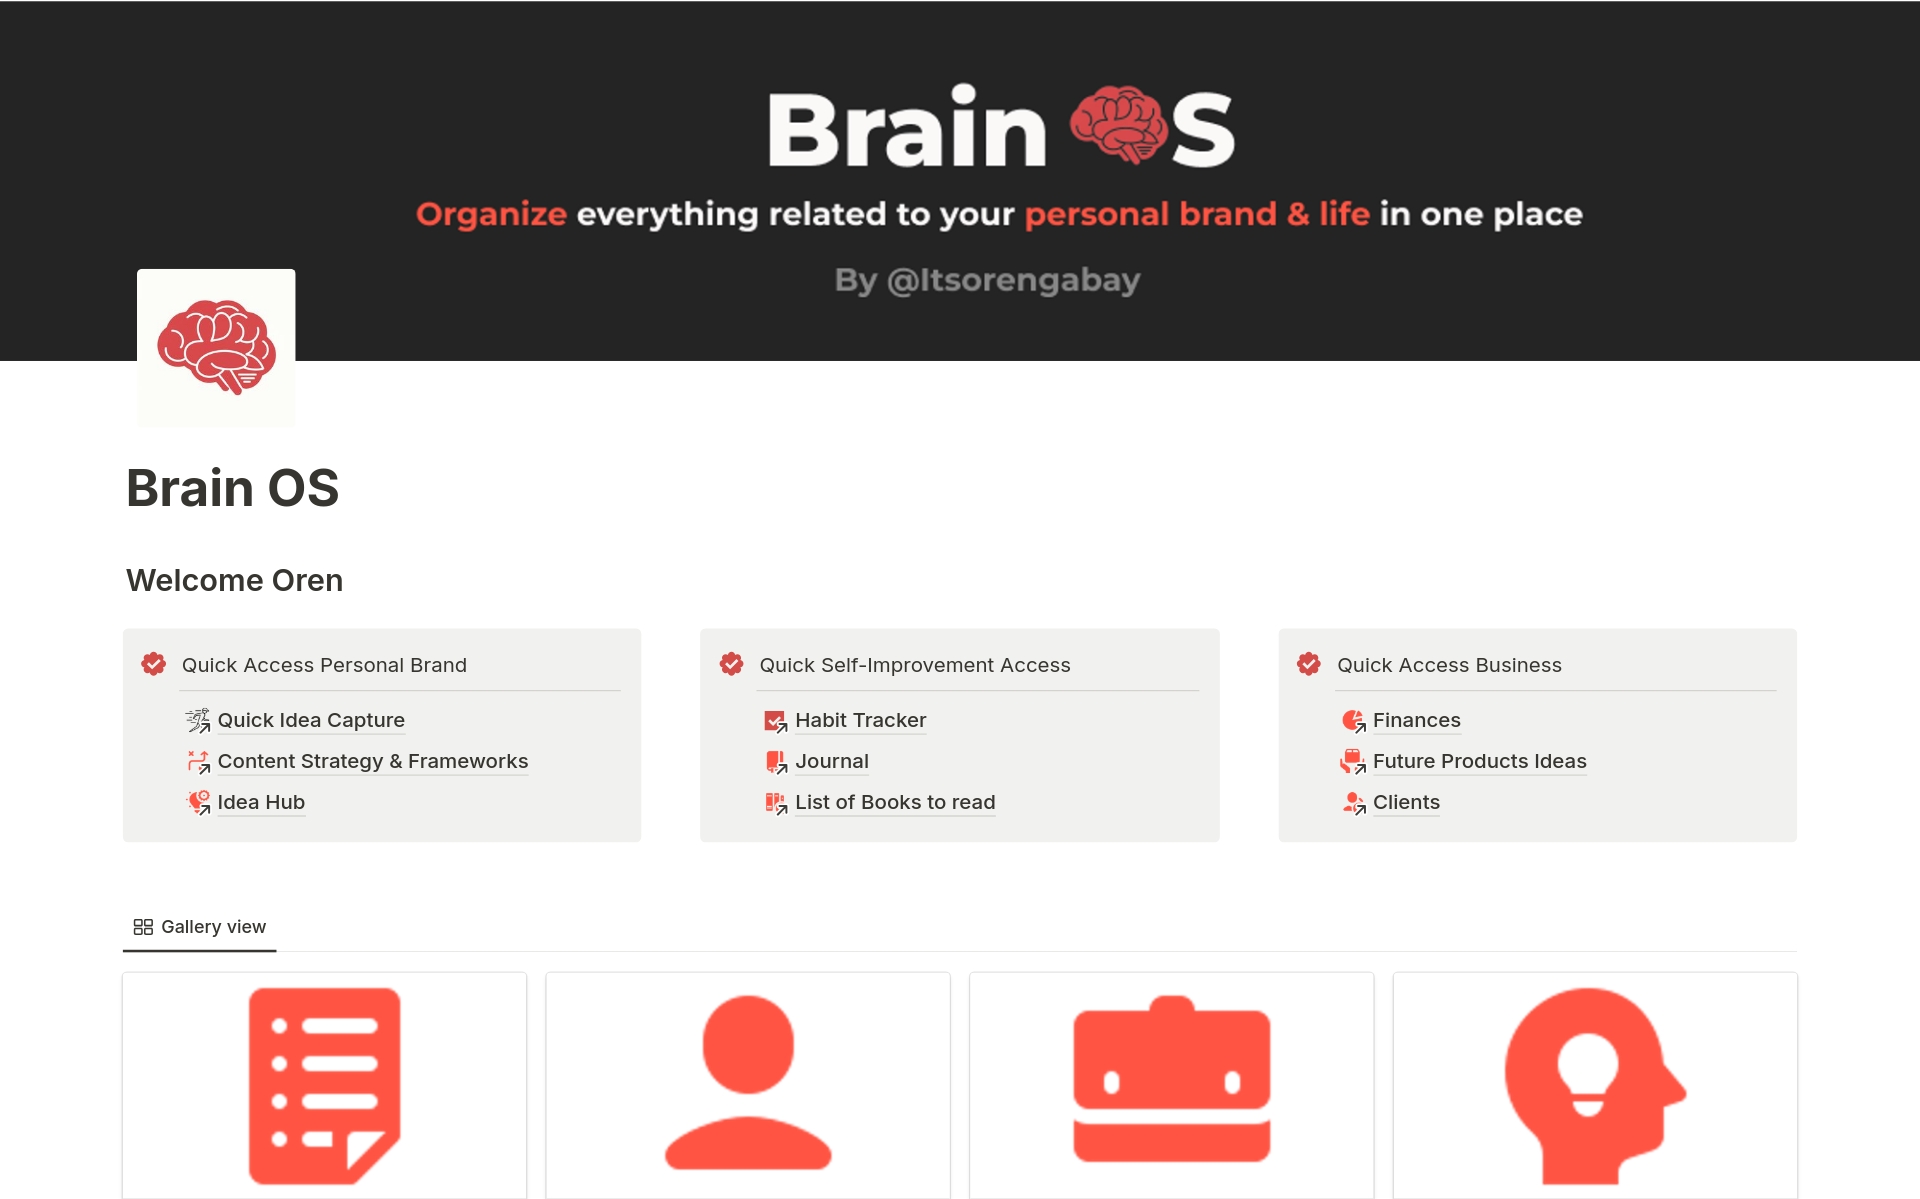 Organize everything related to your personal brand, life, and business in one place!
Organization has never been easier and user friendly to navigate through the pages